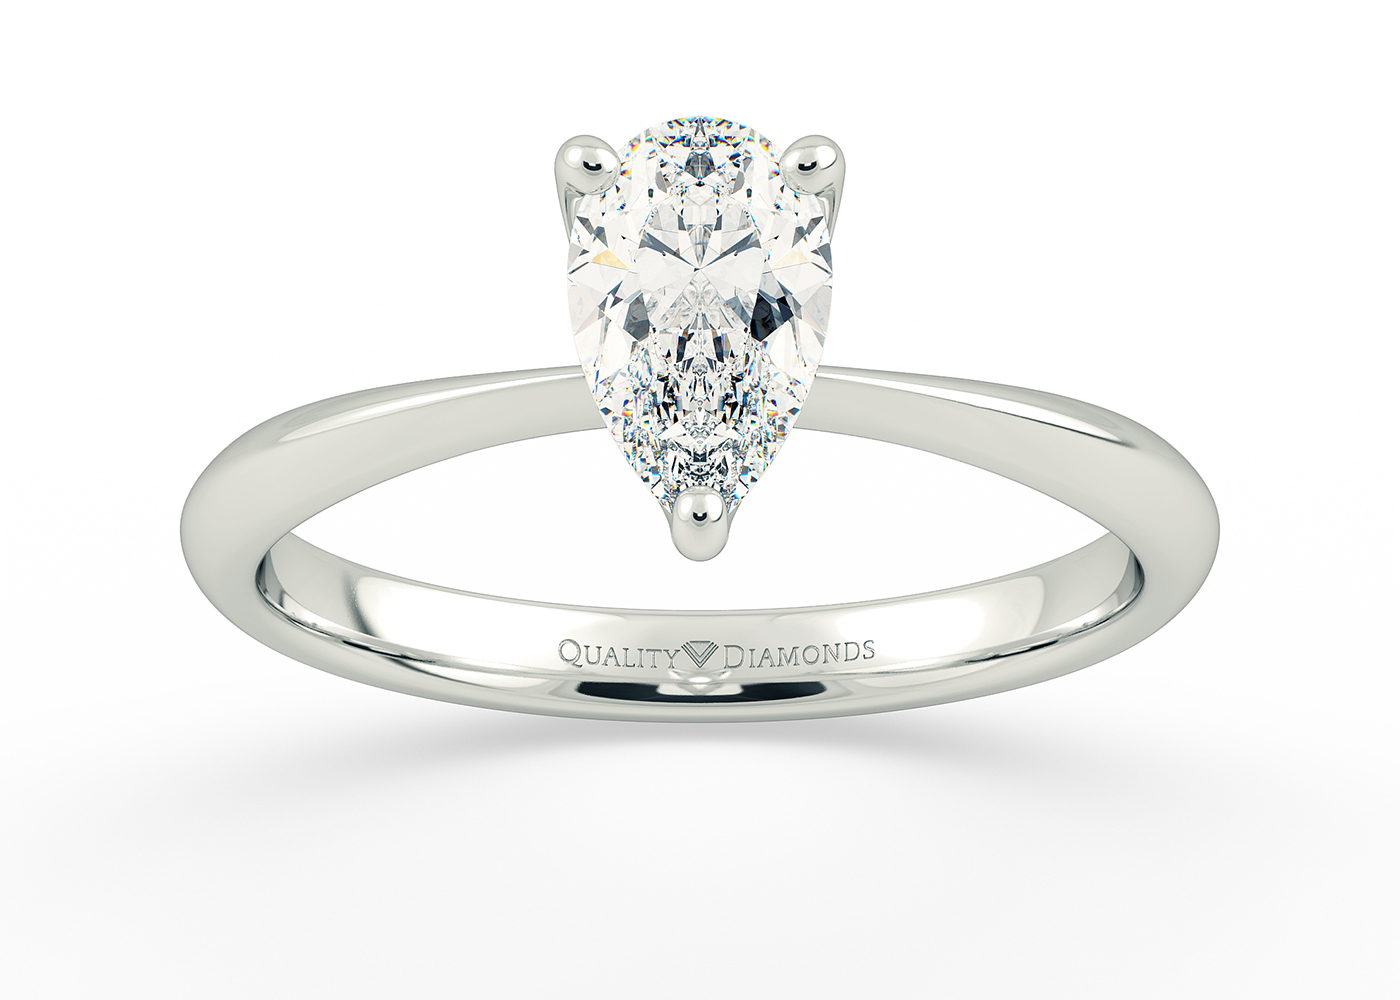 Half Carat Pear Solitaire Diamond Engagement Ring in 9K White Gold